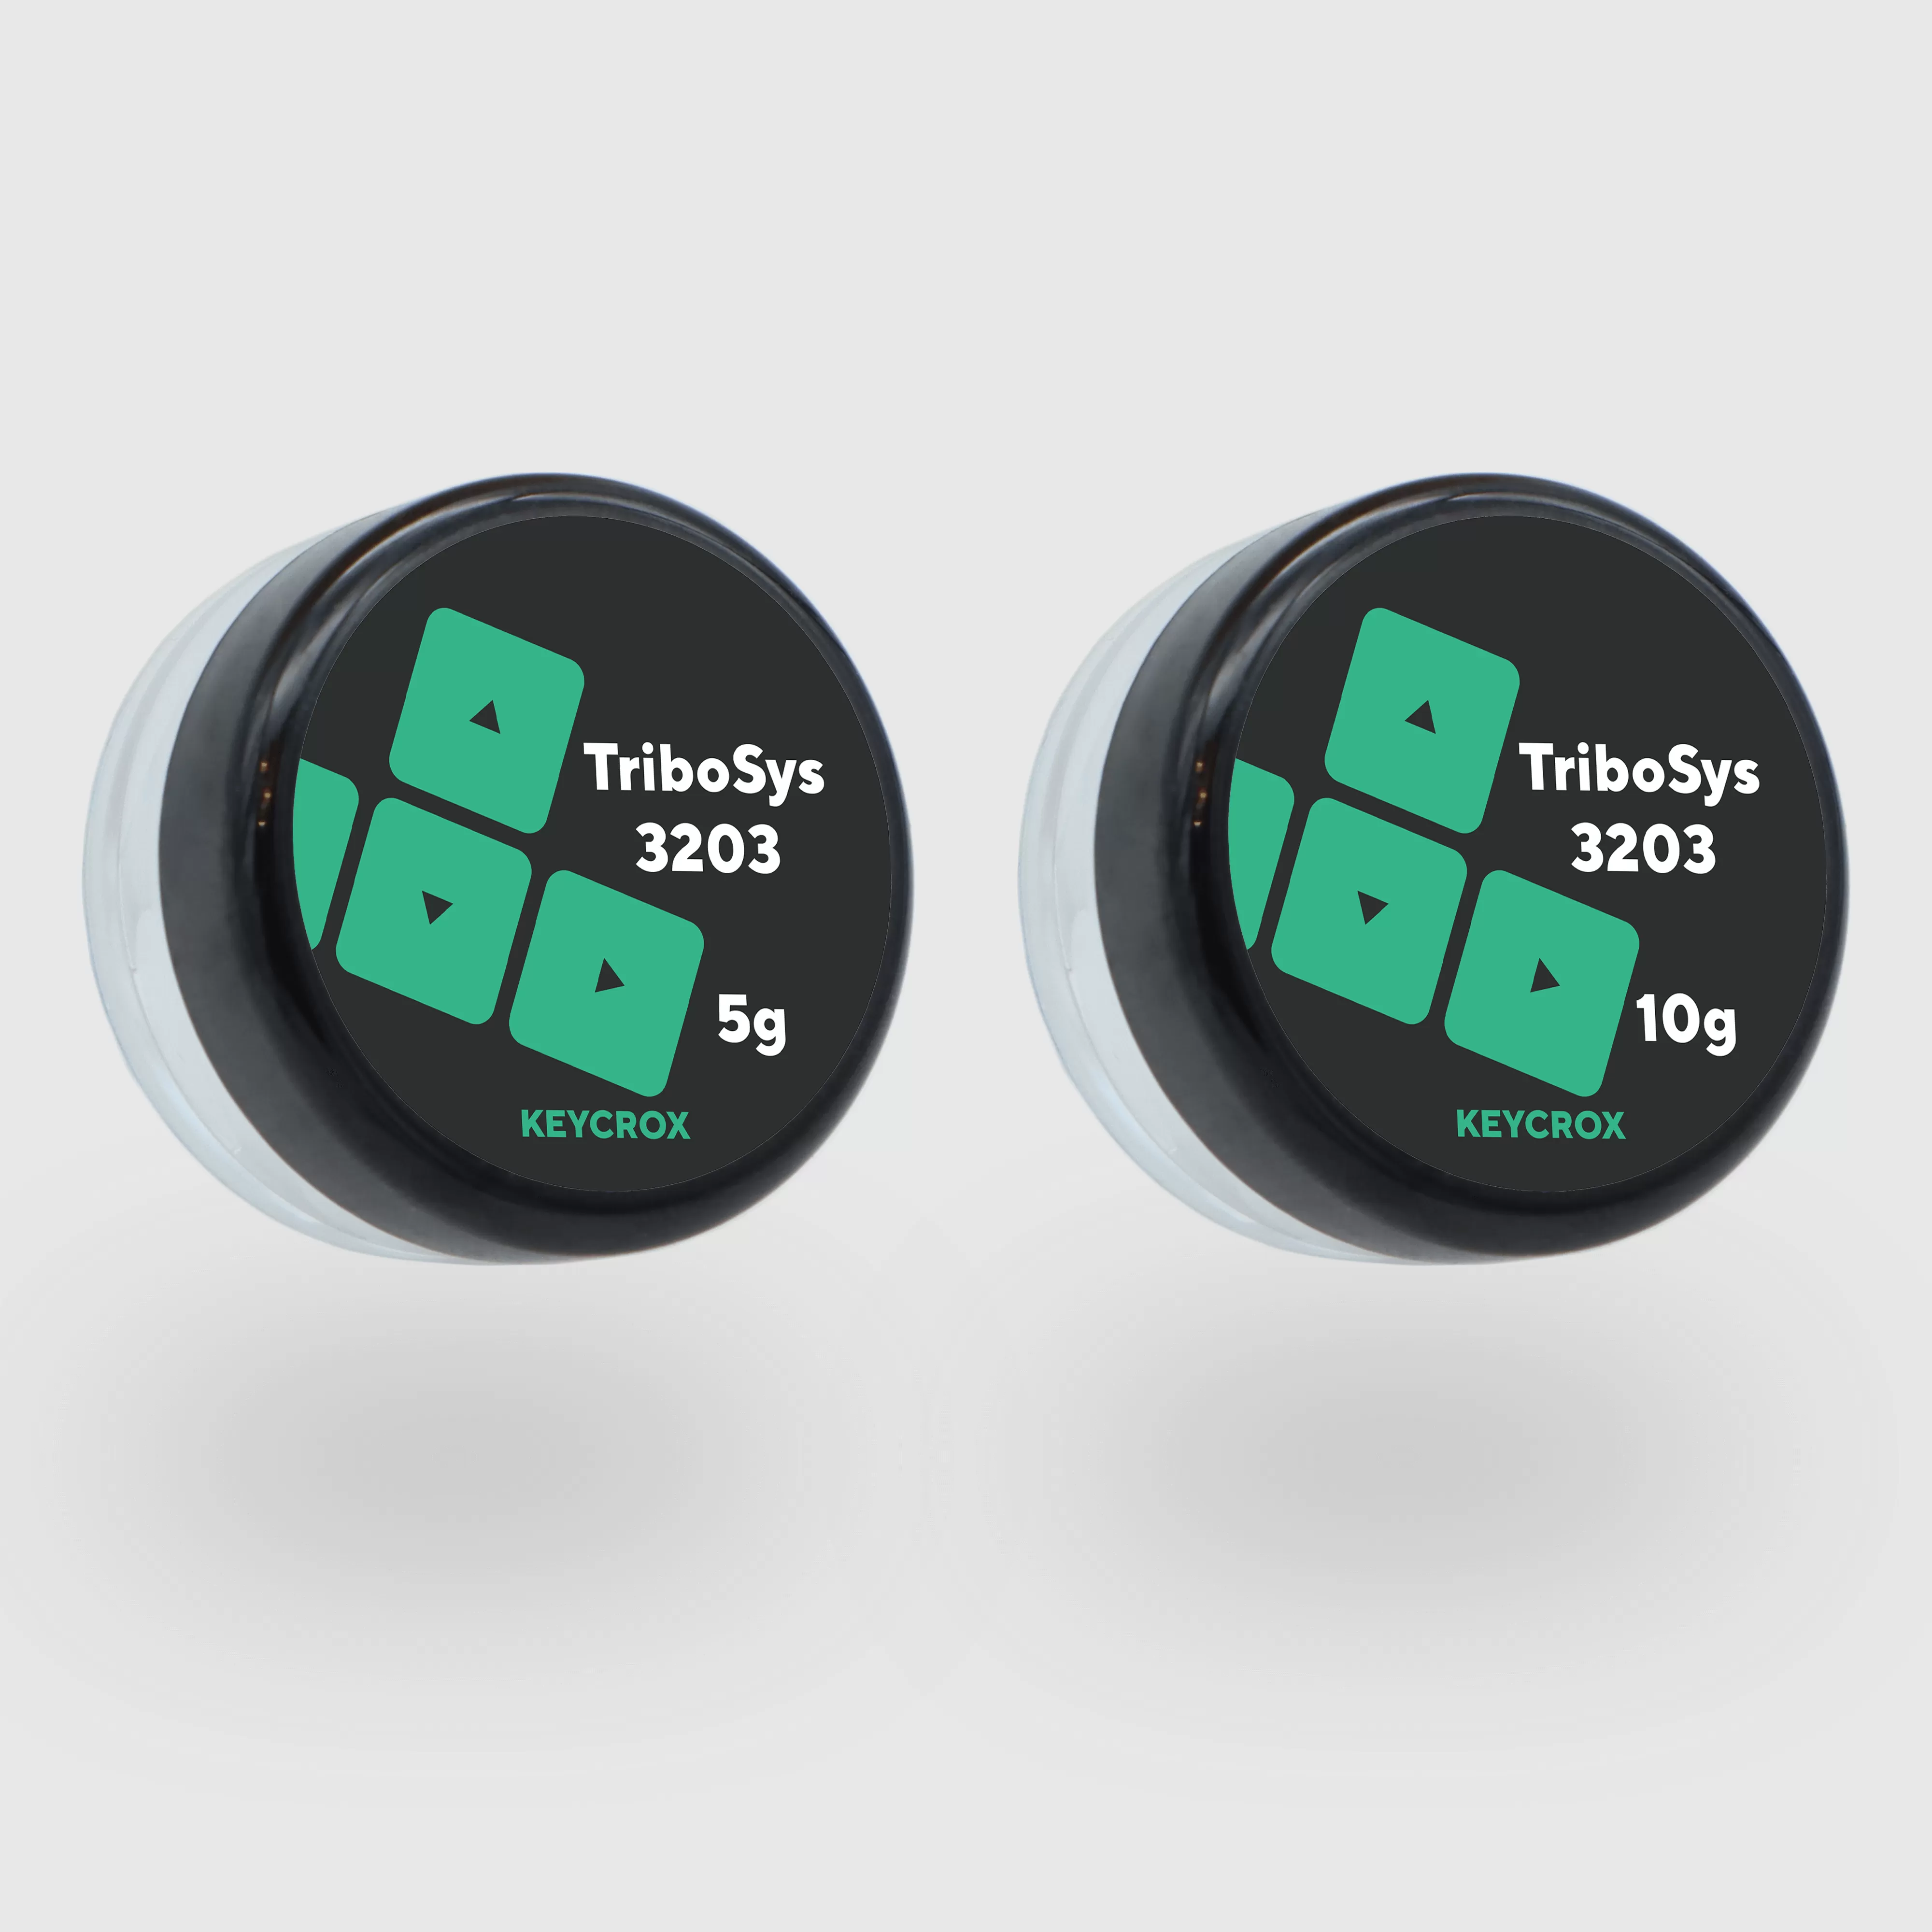 Small capsules of Tribosys 3203 lubricant sold either in 5g or 10g quantities